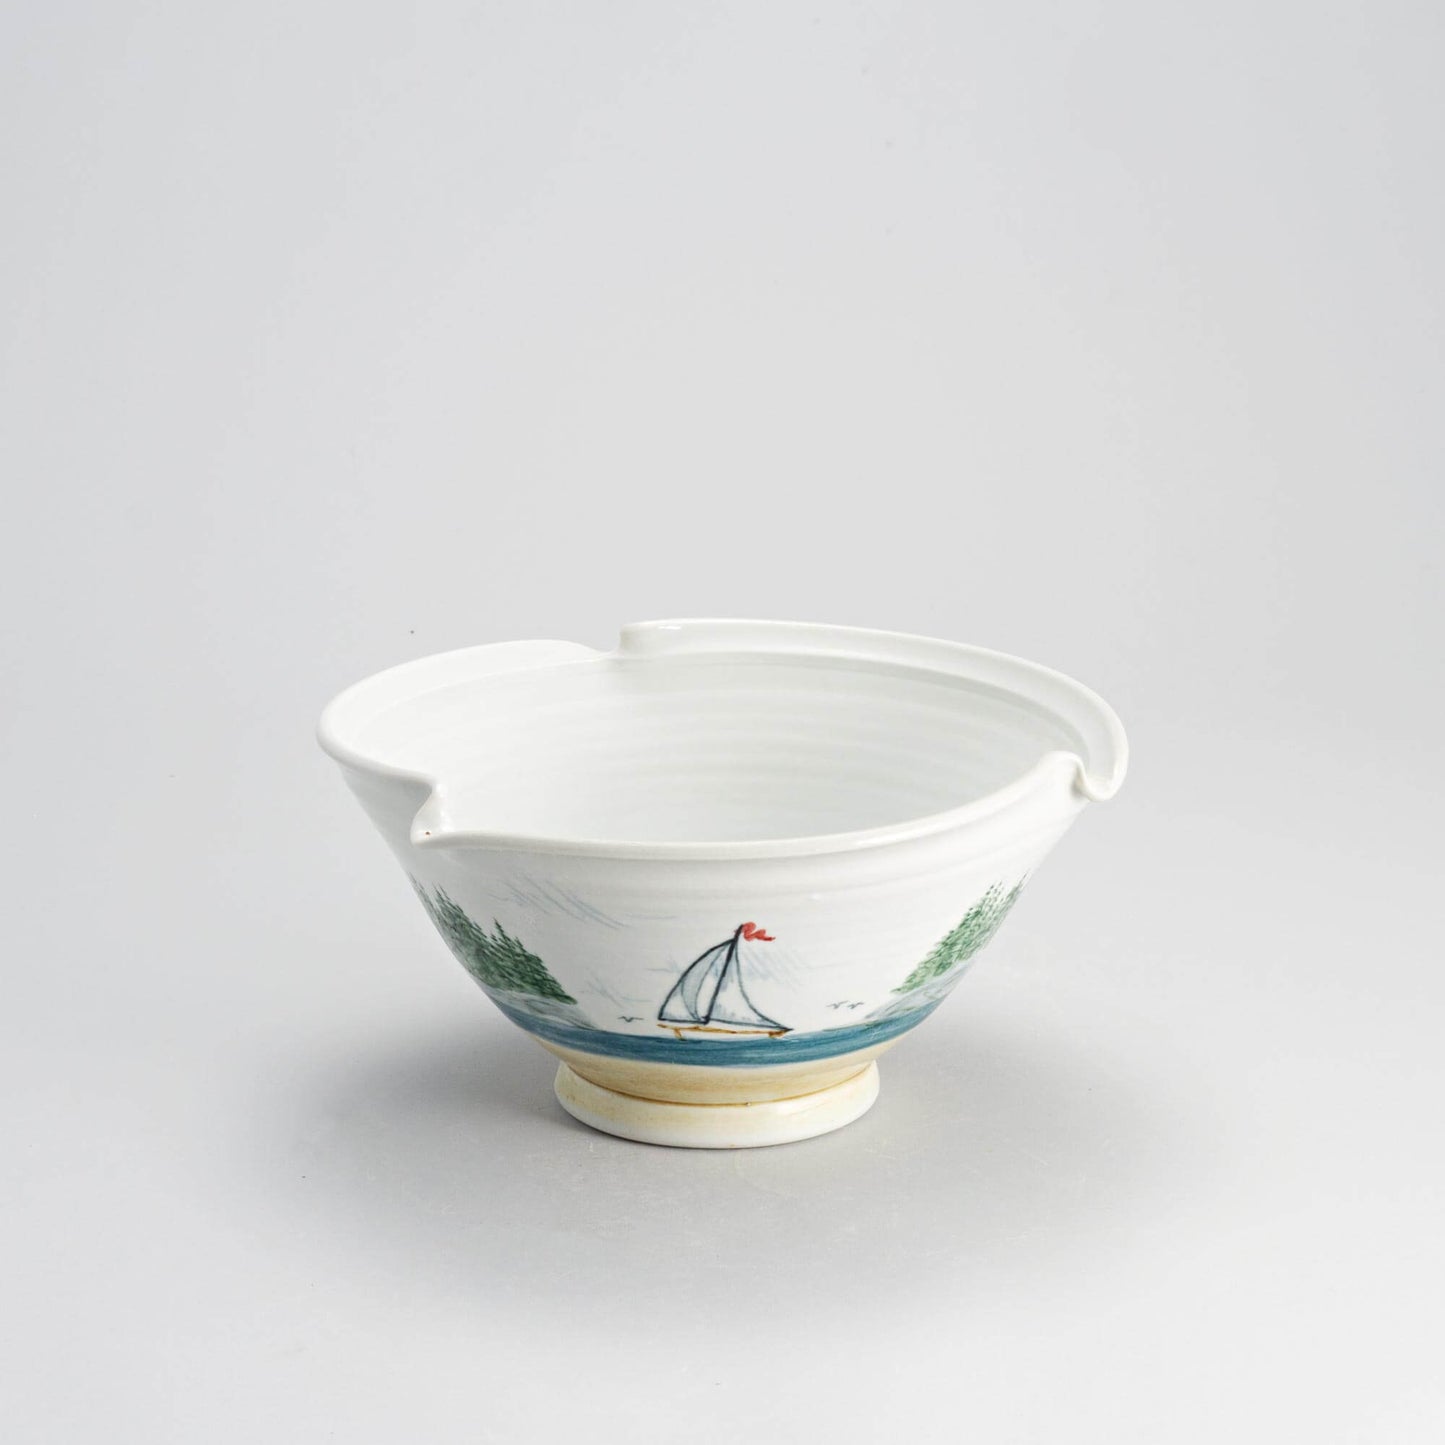 Handmade Pottery Signature Wave Bowl in Sailboat pattern made by Georgetown Pottery in Maine